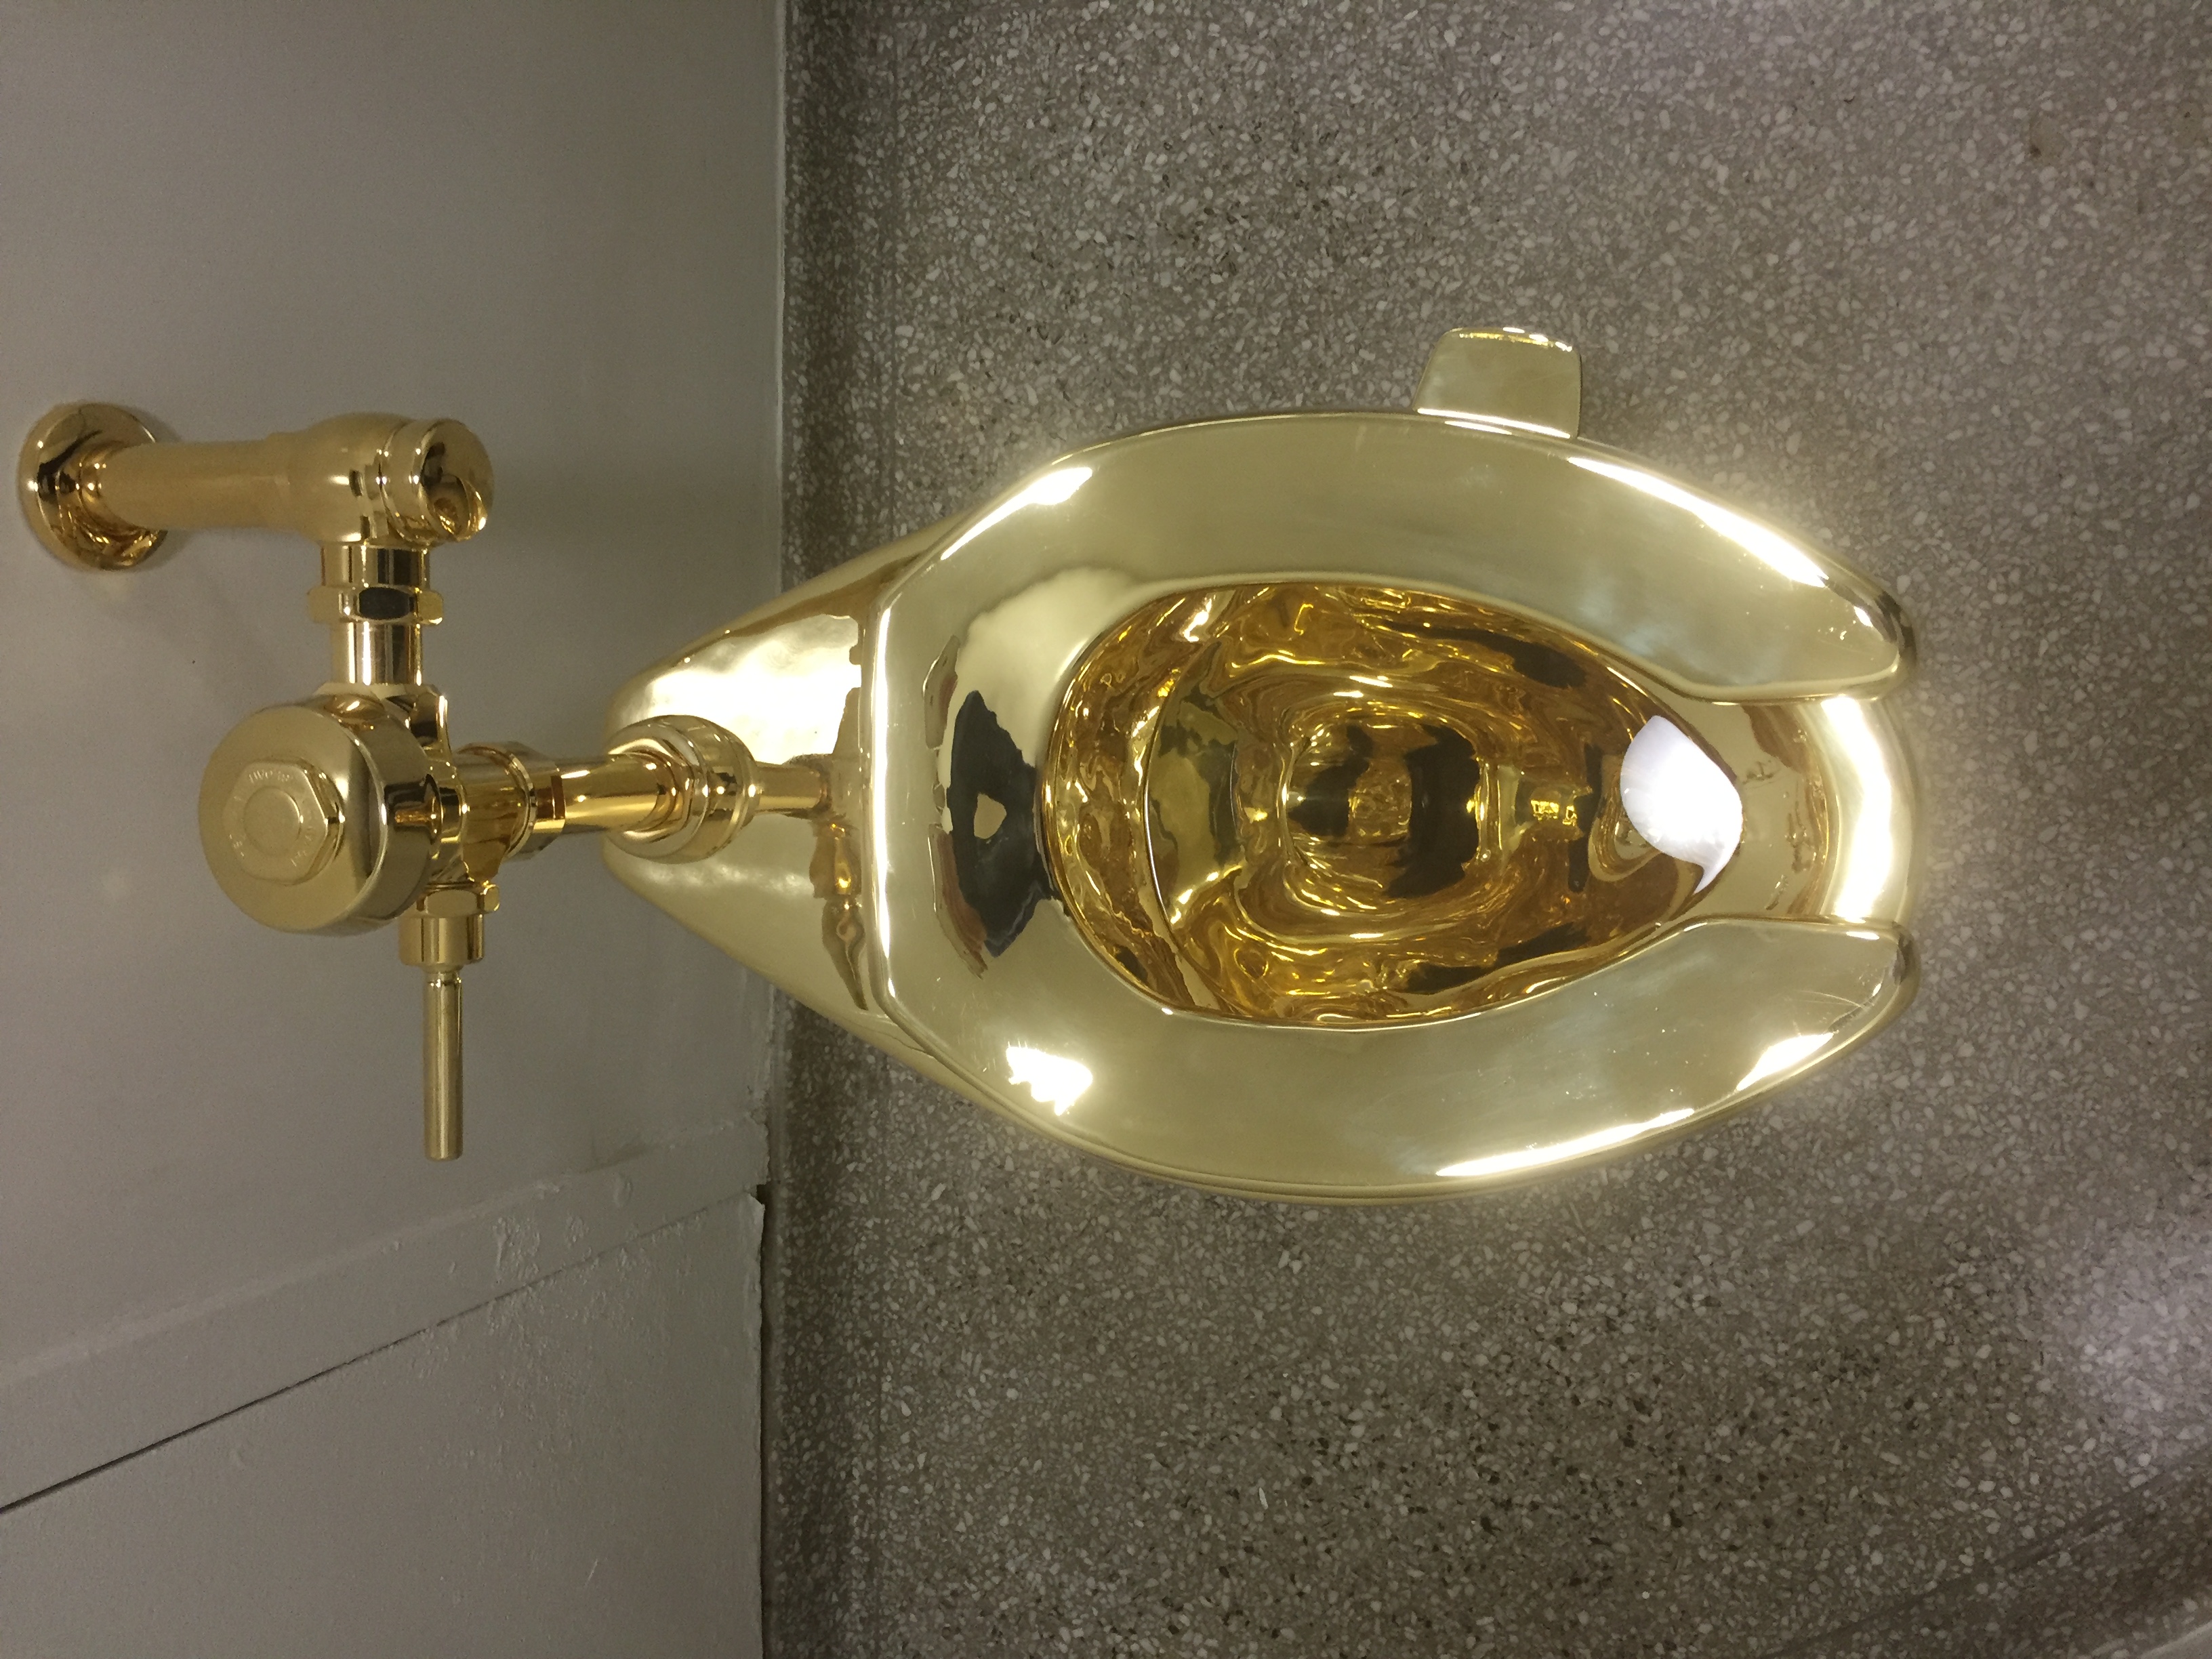 A fully functioning solid gold toilet, made by Italian is going into public use at the Guggenheim Museum (WILLIAM EDWARDS/AFP/Getty Images)